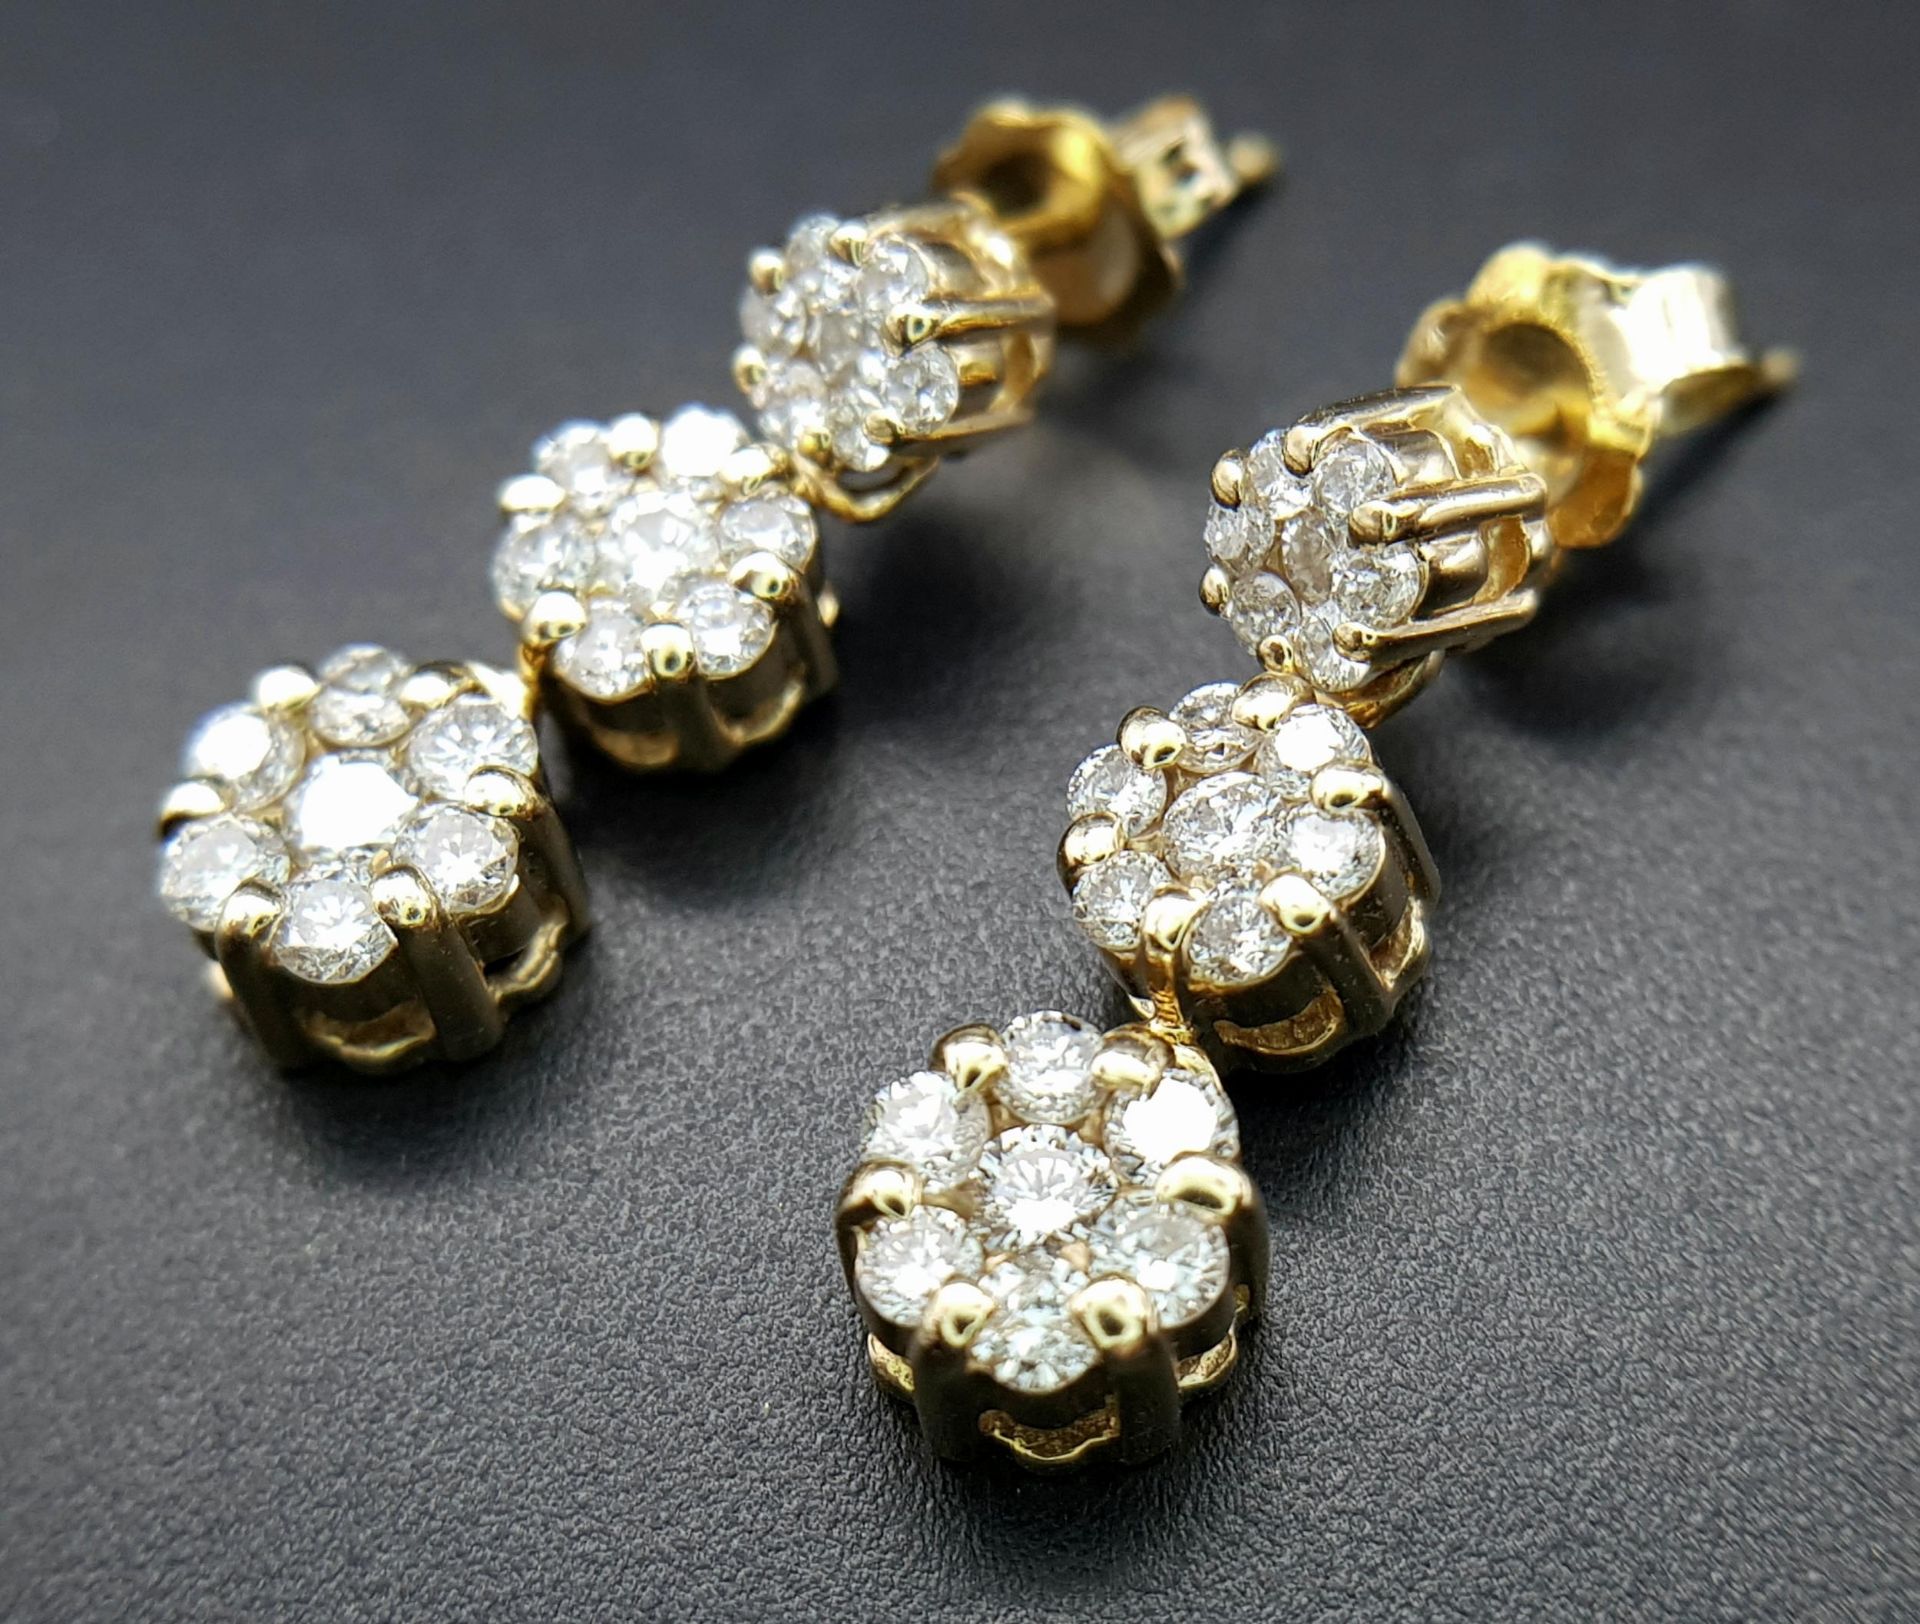 A Pair of 14K Yellow Gold and Diamond Drop Earrings. A total of 42 round cut diamonds - 1ctw. H-I in